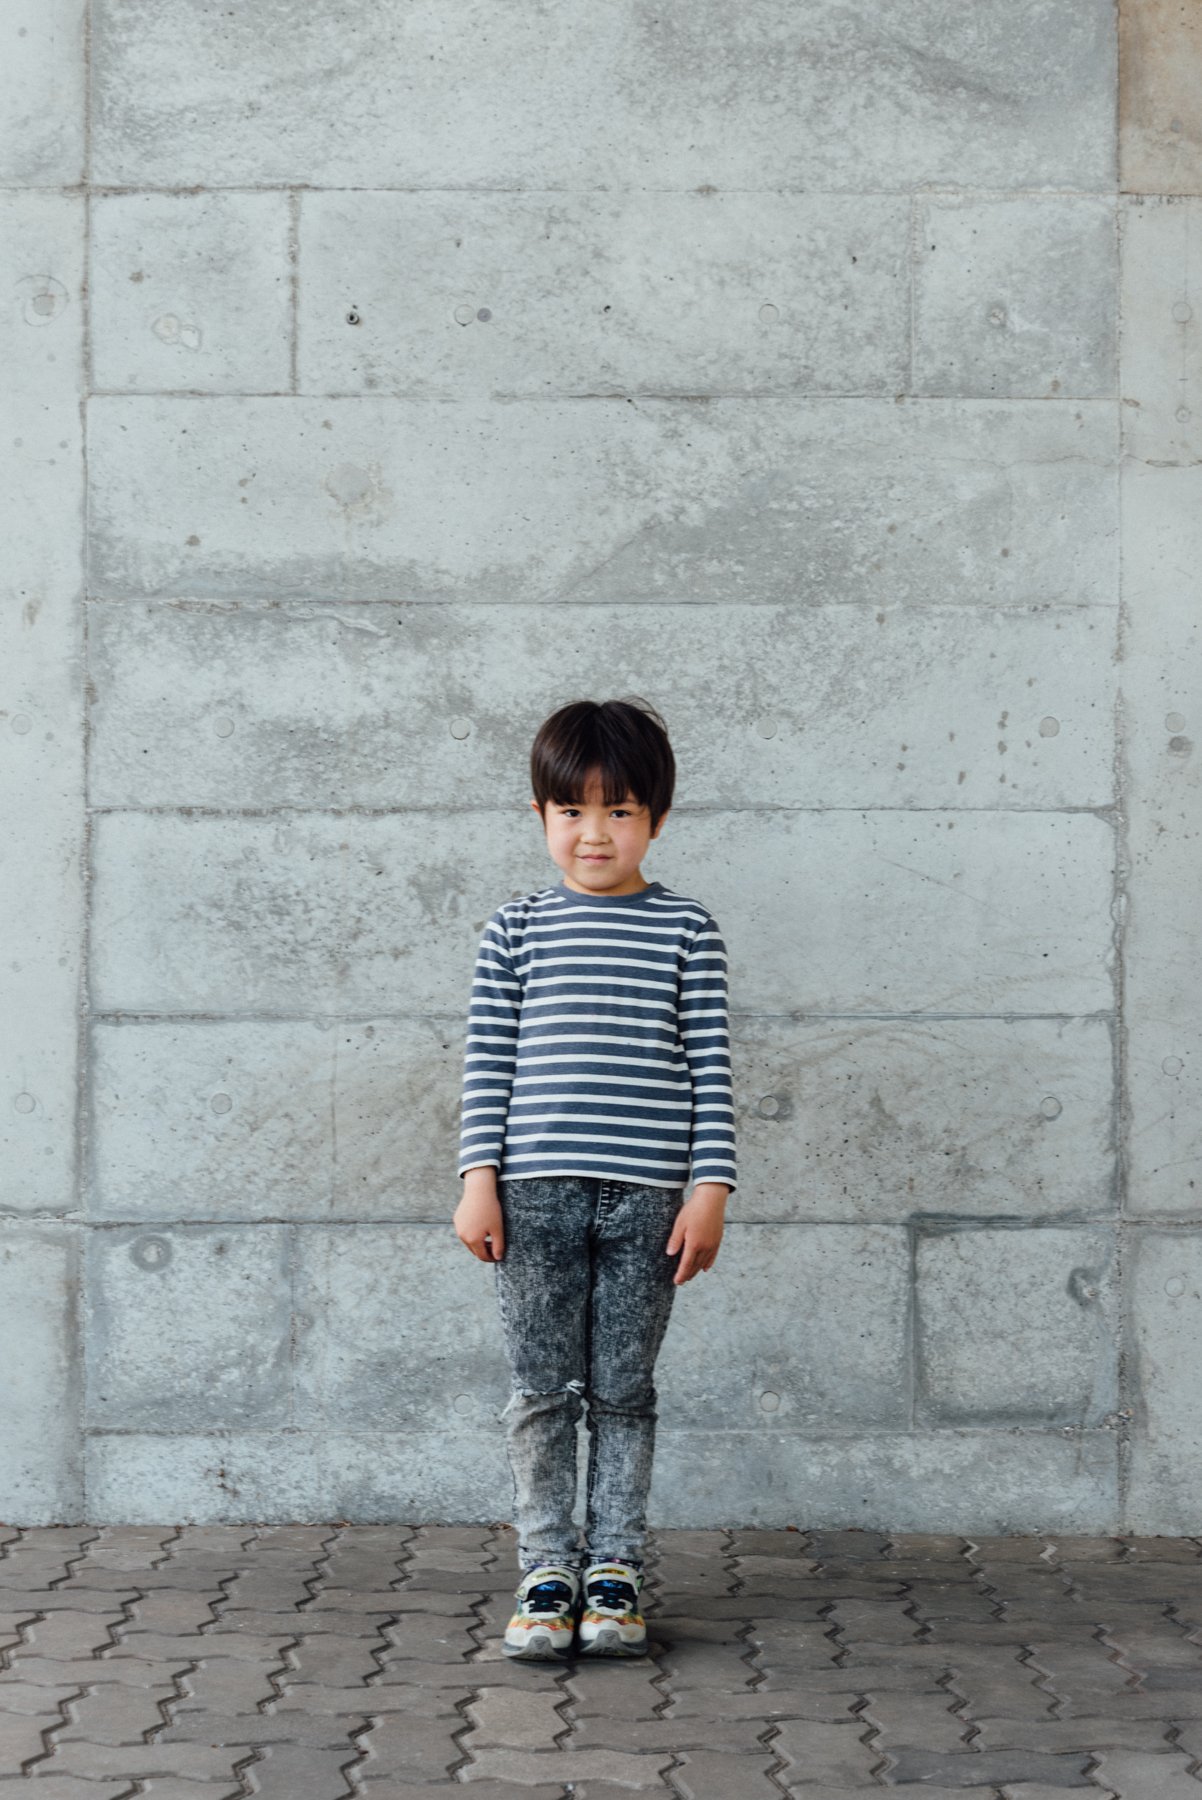  Shirt:  60% COTTON 40% POLYESTER  (ribs)  59% COTTON 39% POLYESTER 2% POLYURETHANE  Pants:  75% COTTON 20% POLYESTER 5% POLYURETHANE   “His grandparents bought these pants and T-shirts for him. They were torn up after a lot of play at daycare. My ol